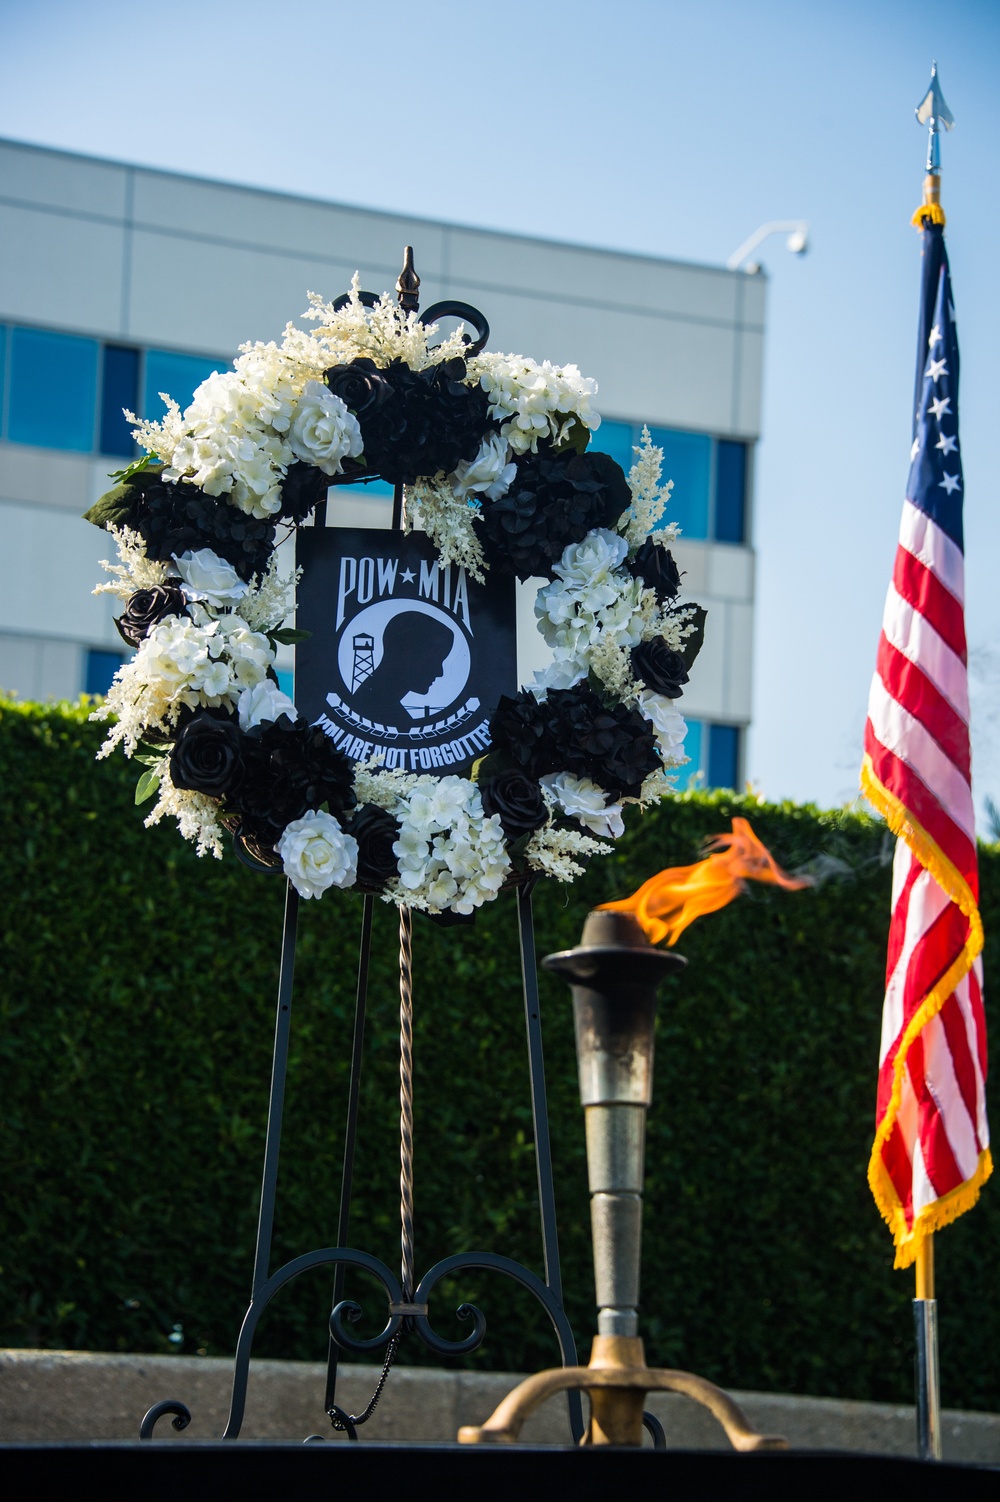 Running in Remembrance and to Honor POW/MIA